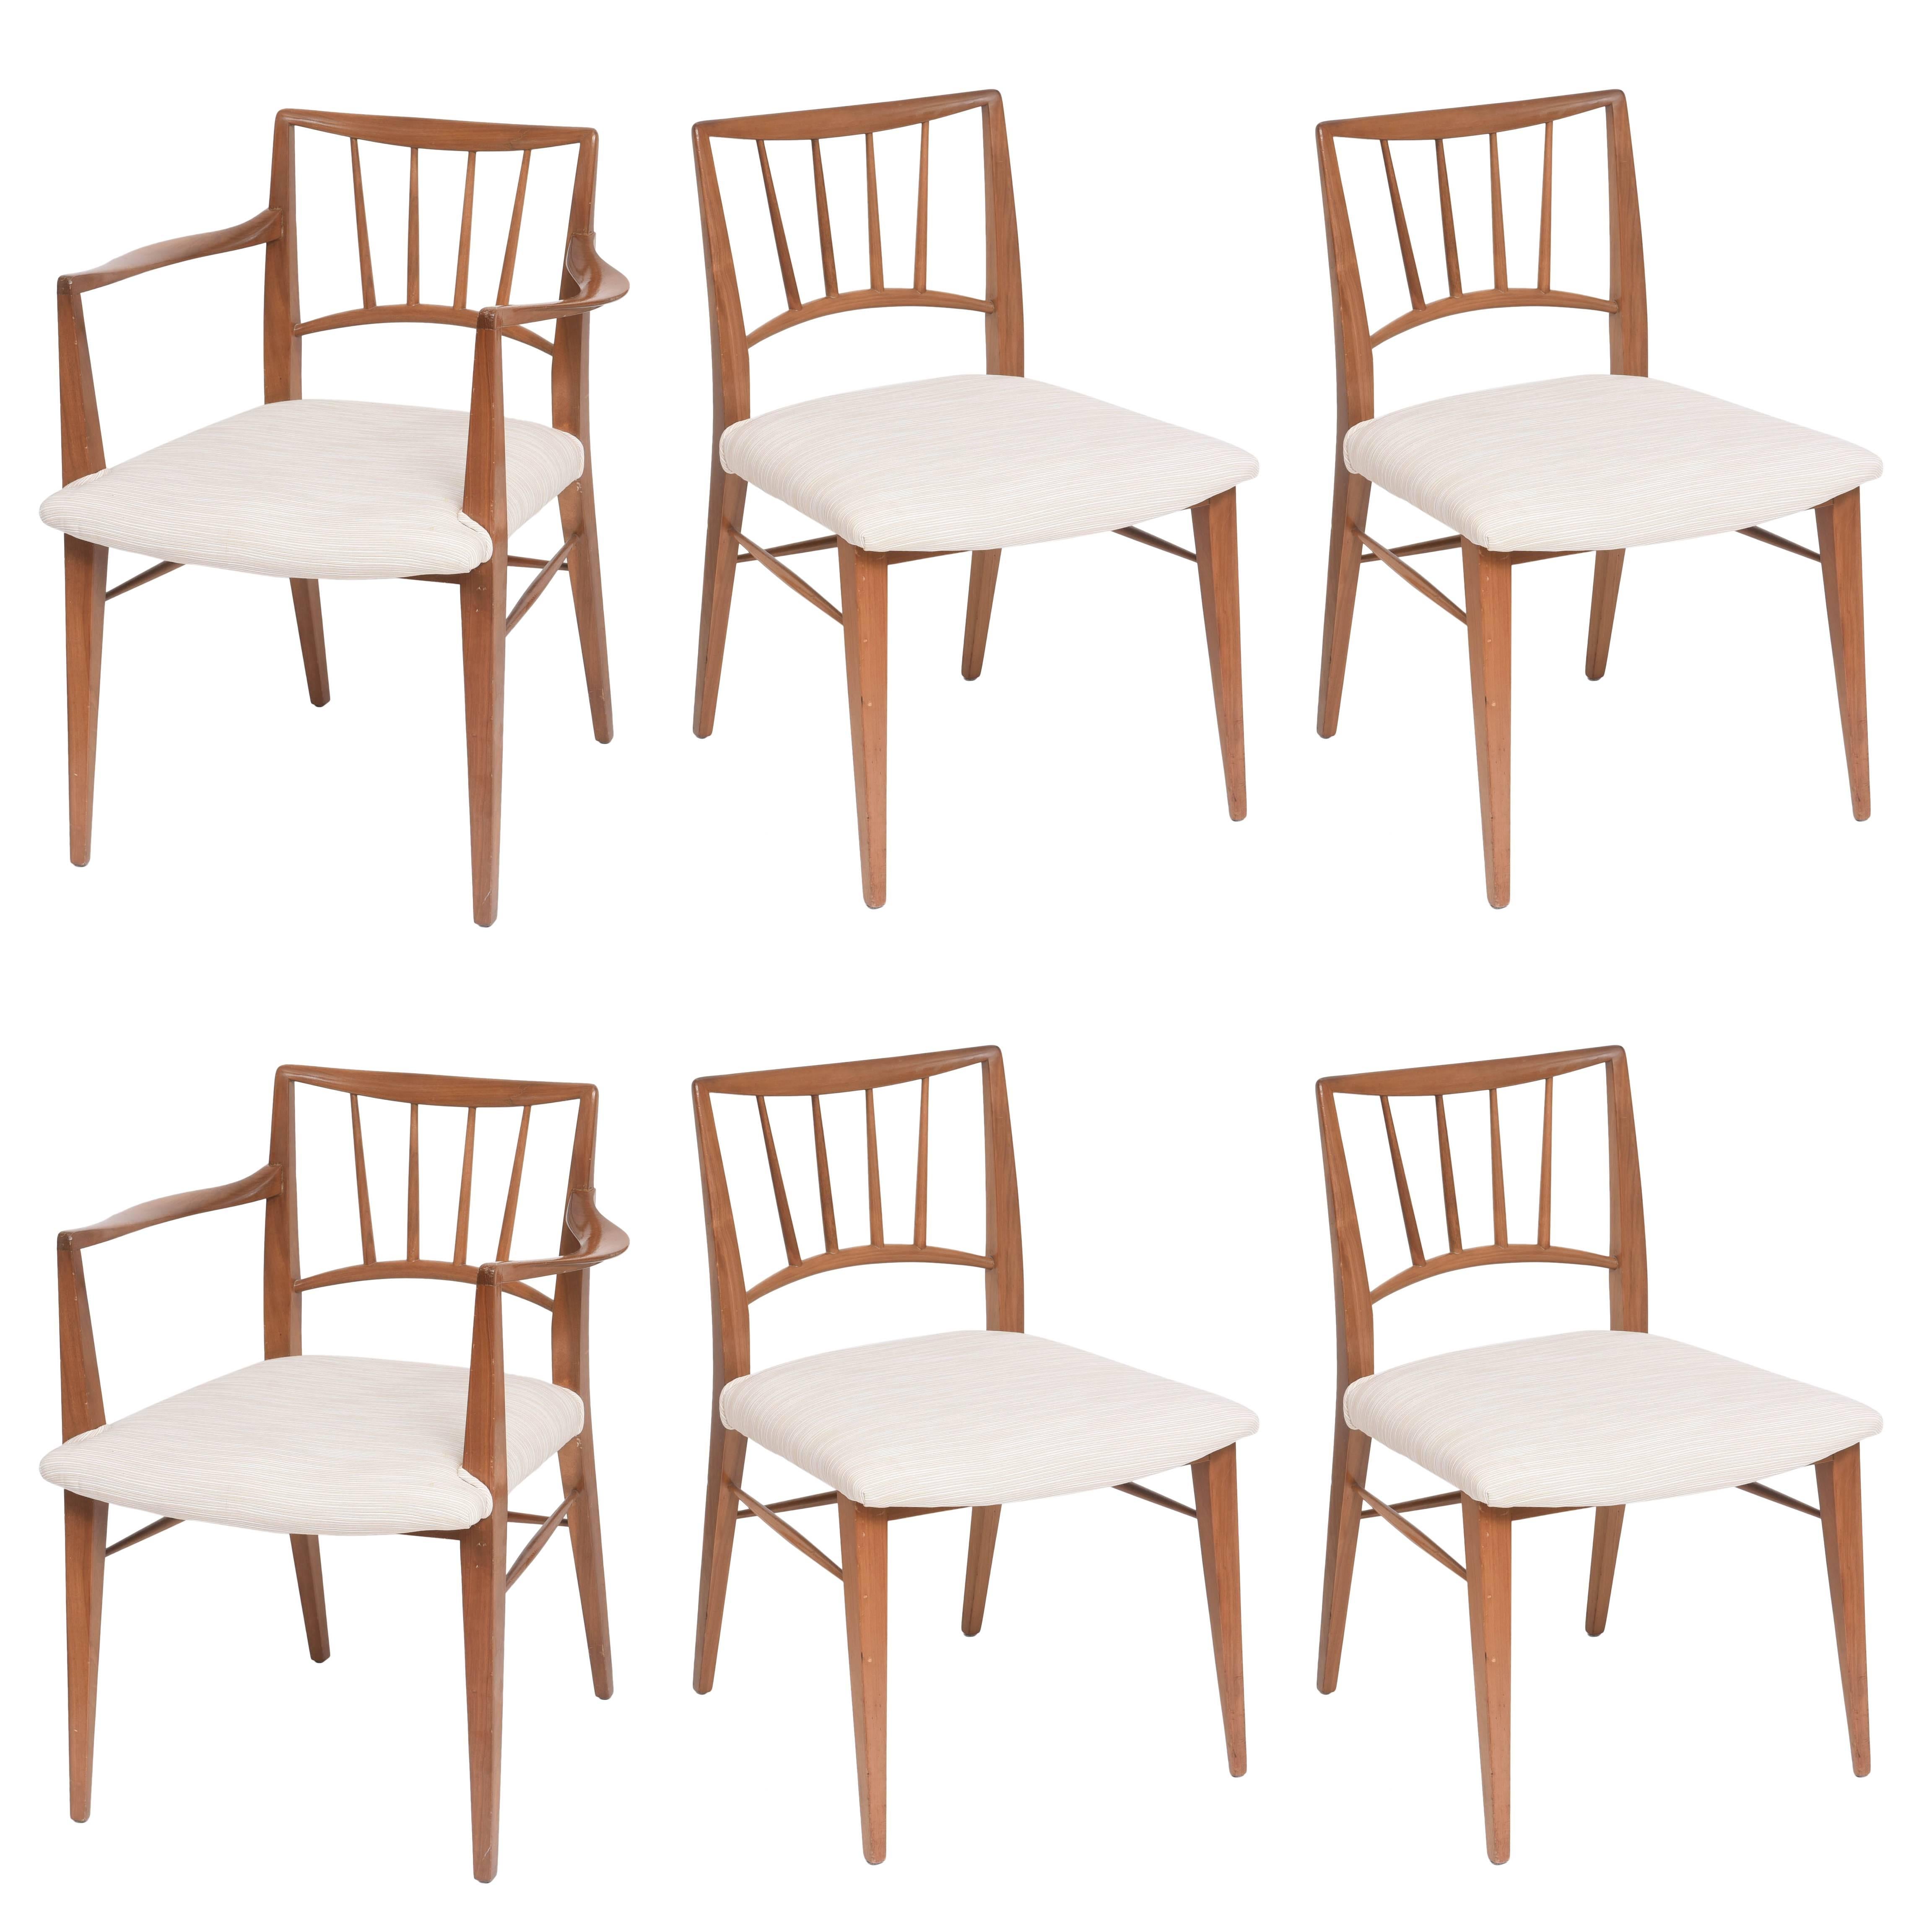 Set of Six Mid-Century Modern Dining Chairs by Edward Wormley for Dunbar